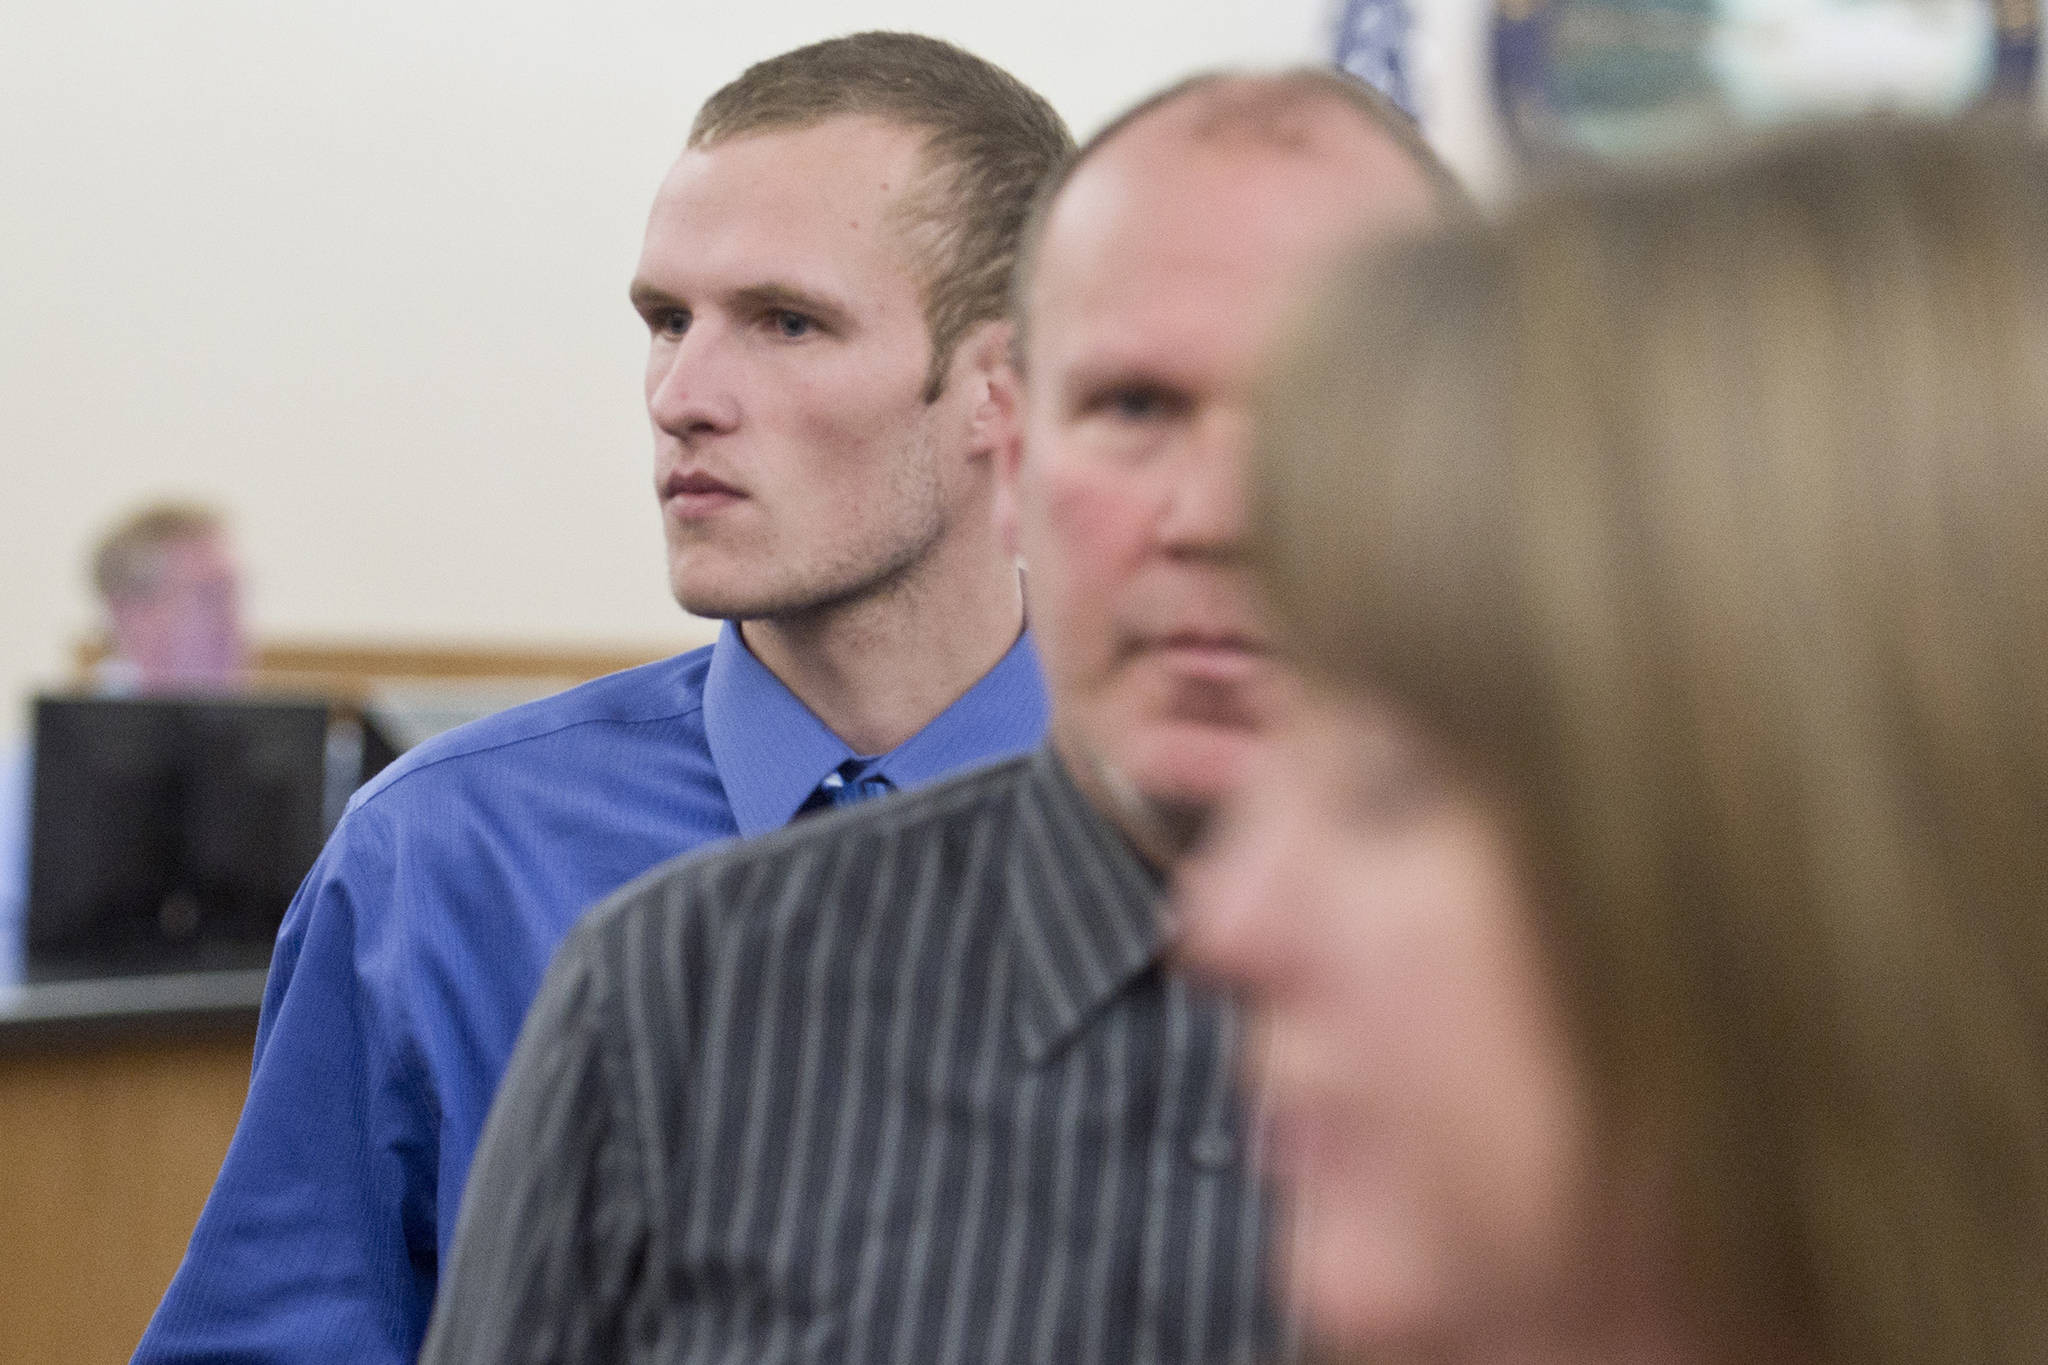 Ty Alexander Grussendorf, 22 at the time, follows his parents out of Juneau Superior Court after a trial date-setting hearing on Wednesday, March 1, 2017. (Michael Penn | Juneau Empire File)